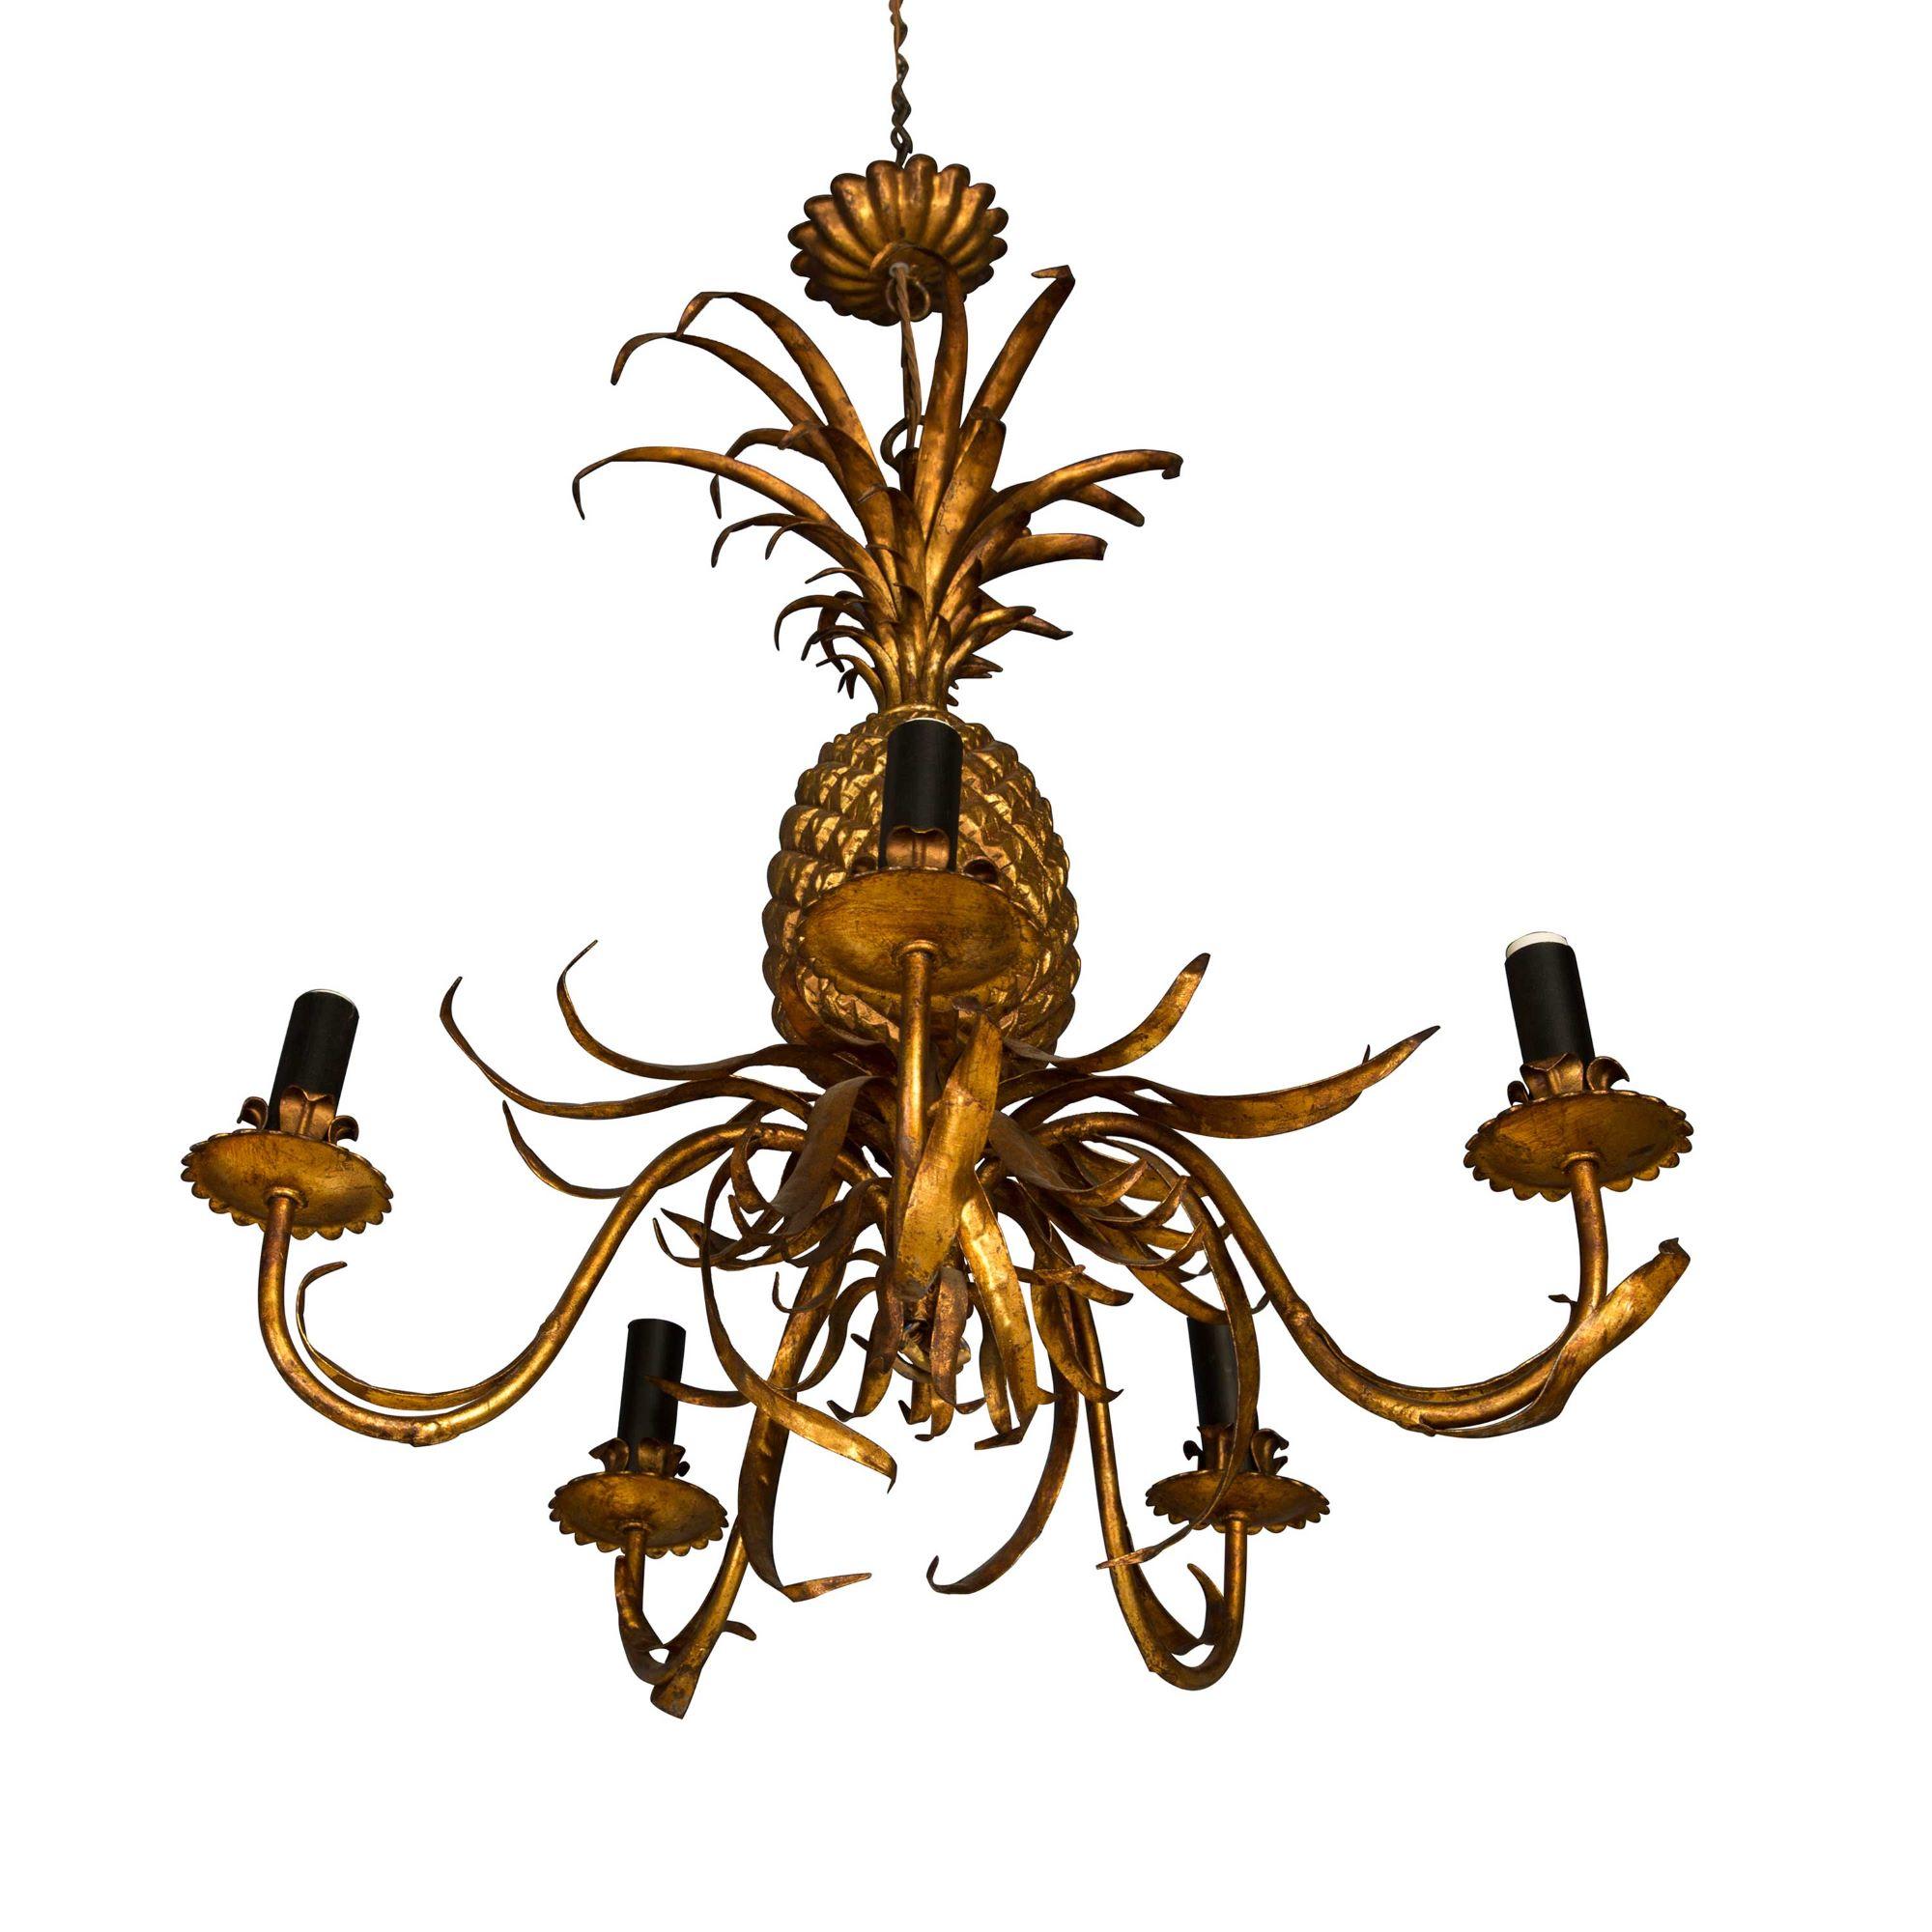 This 1940s five-arm chandelier is created in the shape of a pineapple and is a beautiful gold color. The arms are formed as elegant leaves, each holding a light upon a platter. The drop height of this chandelier can be adjusted by adding a chain.